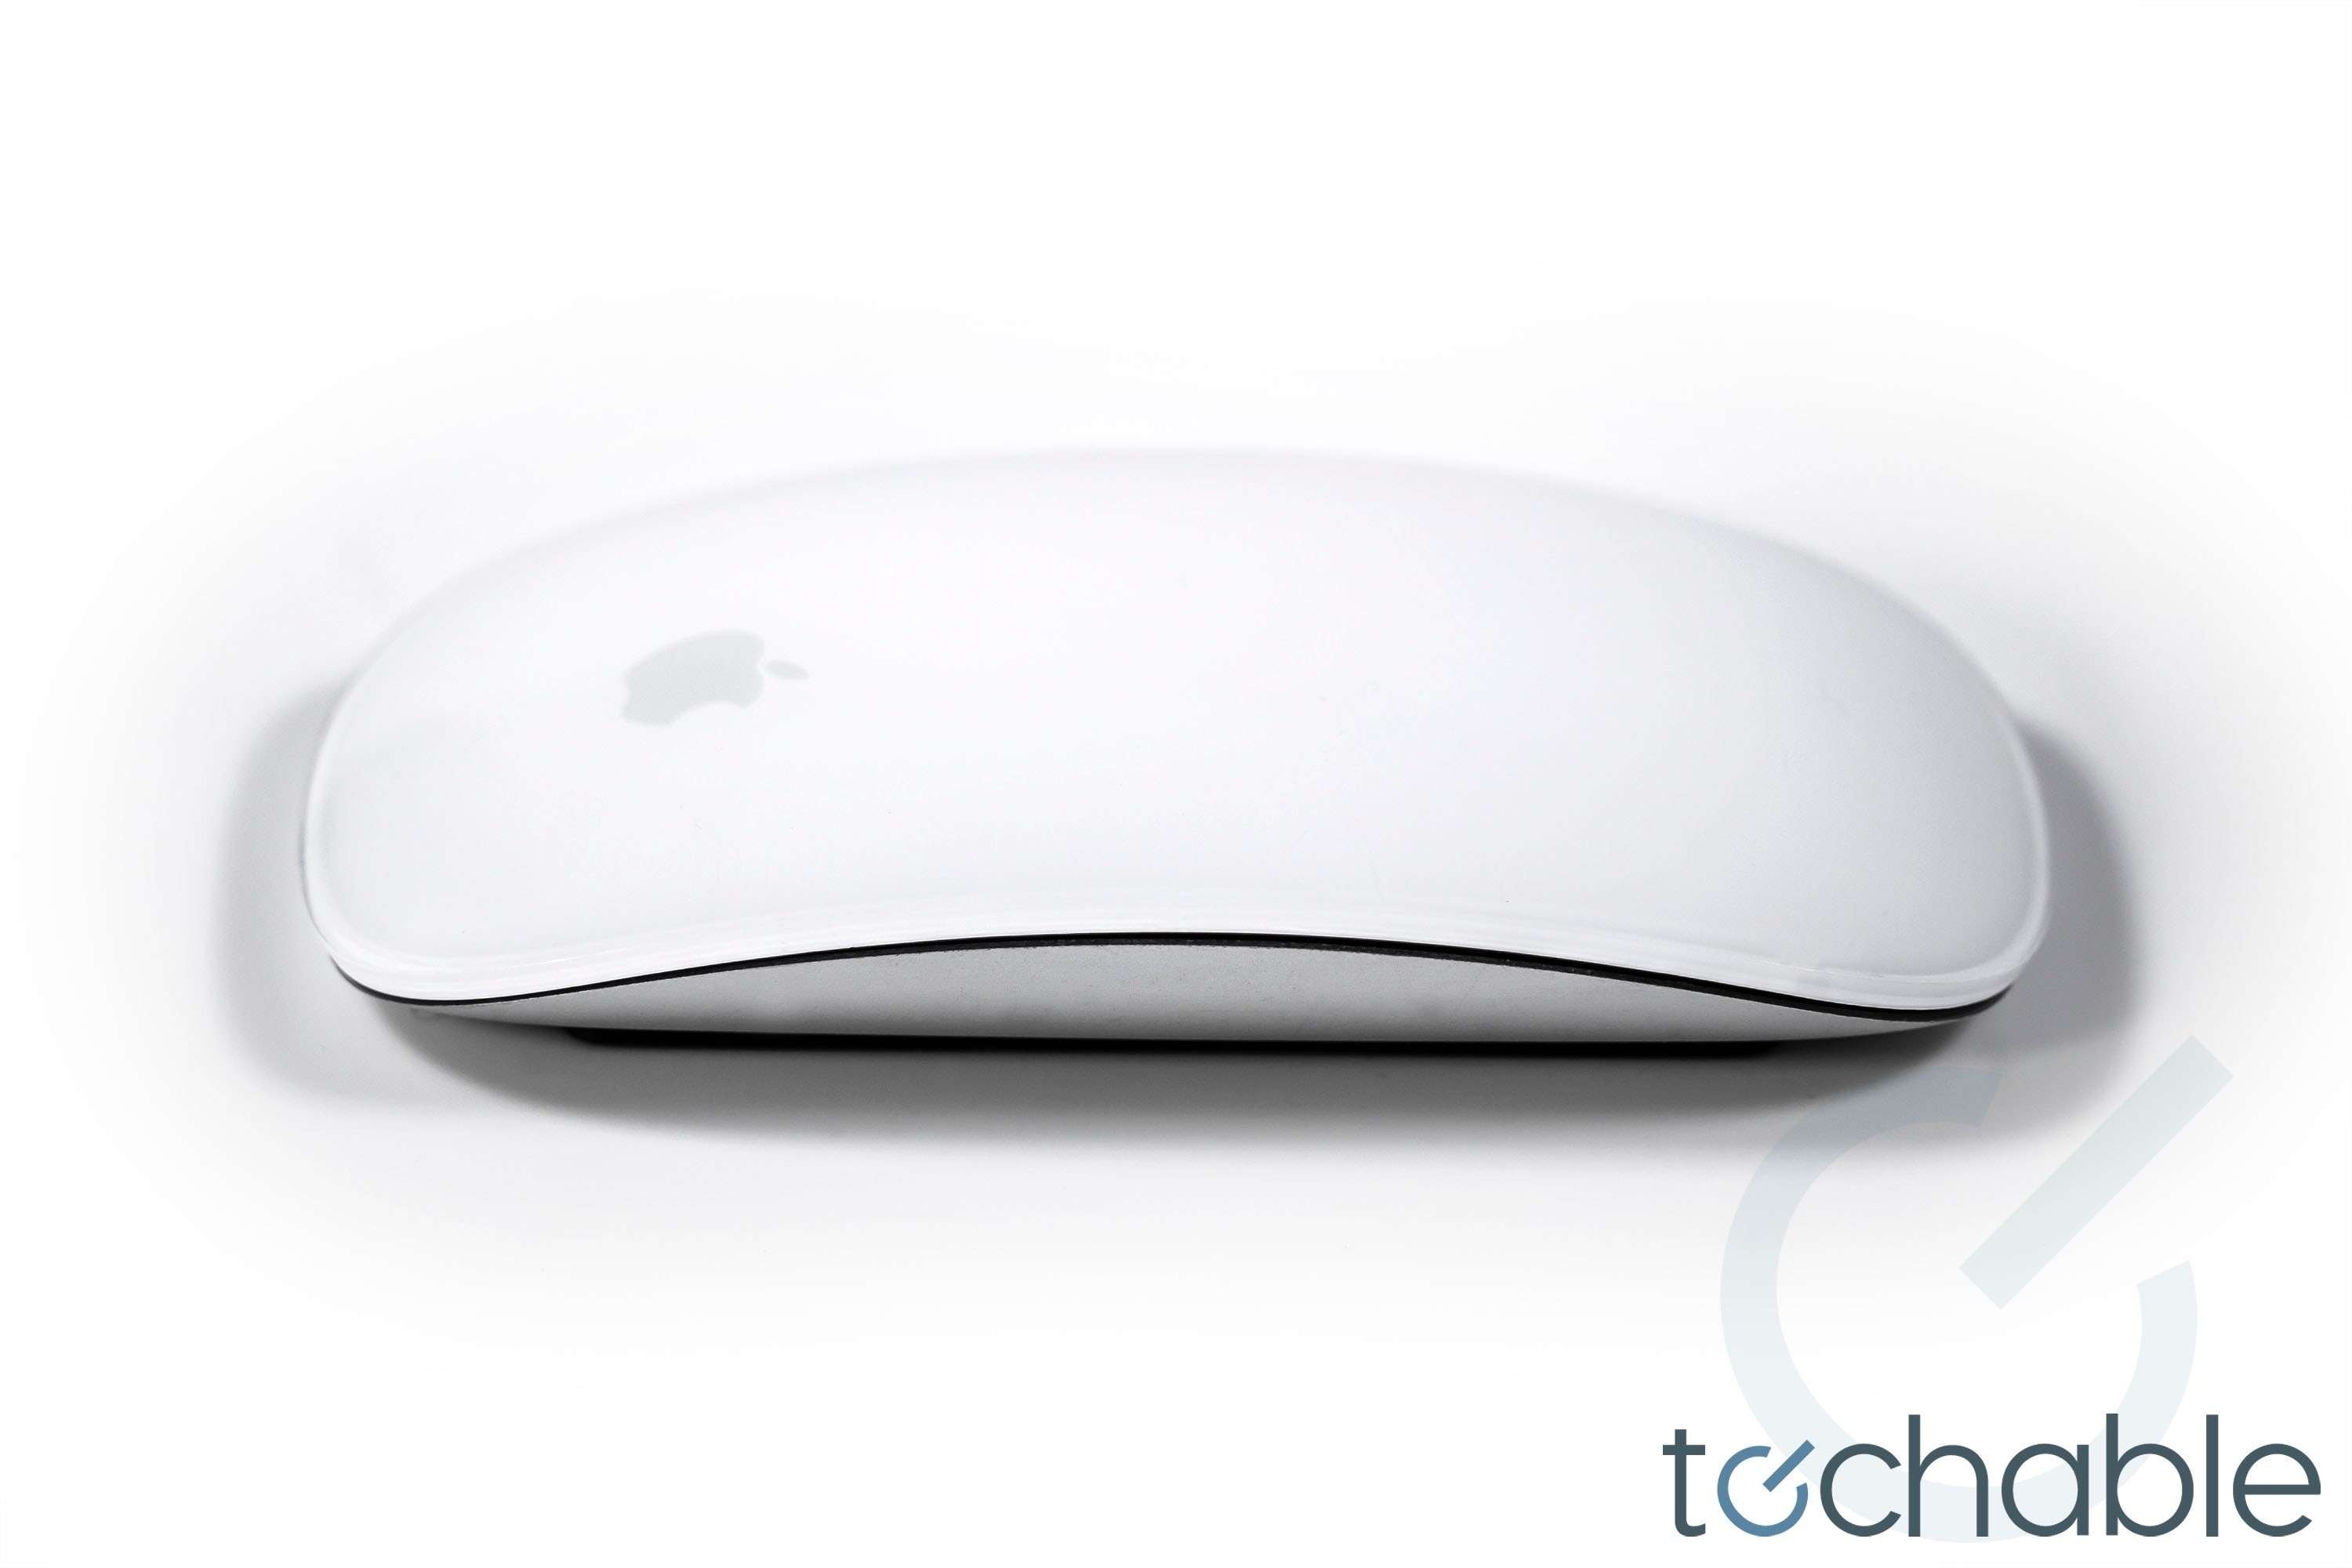 Buy Used & Refurbished Apple Magic Mouse Bluetooth Wireless A1296